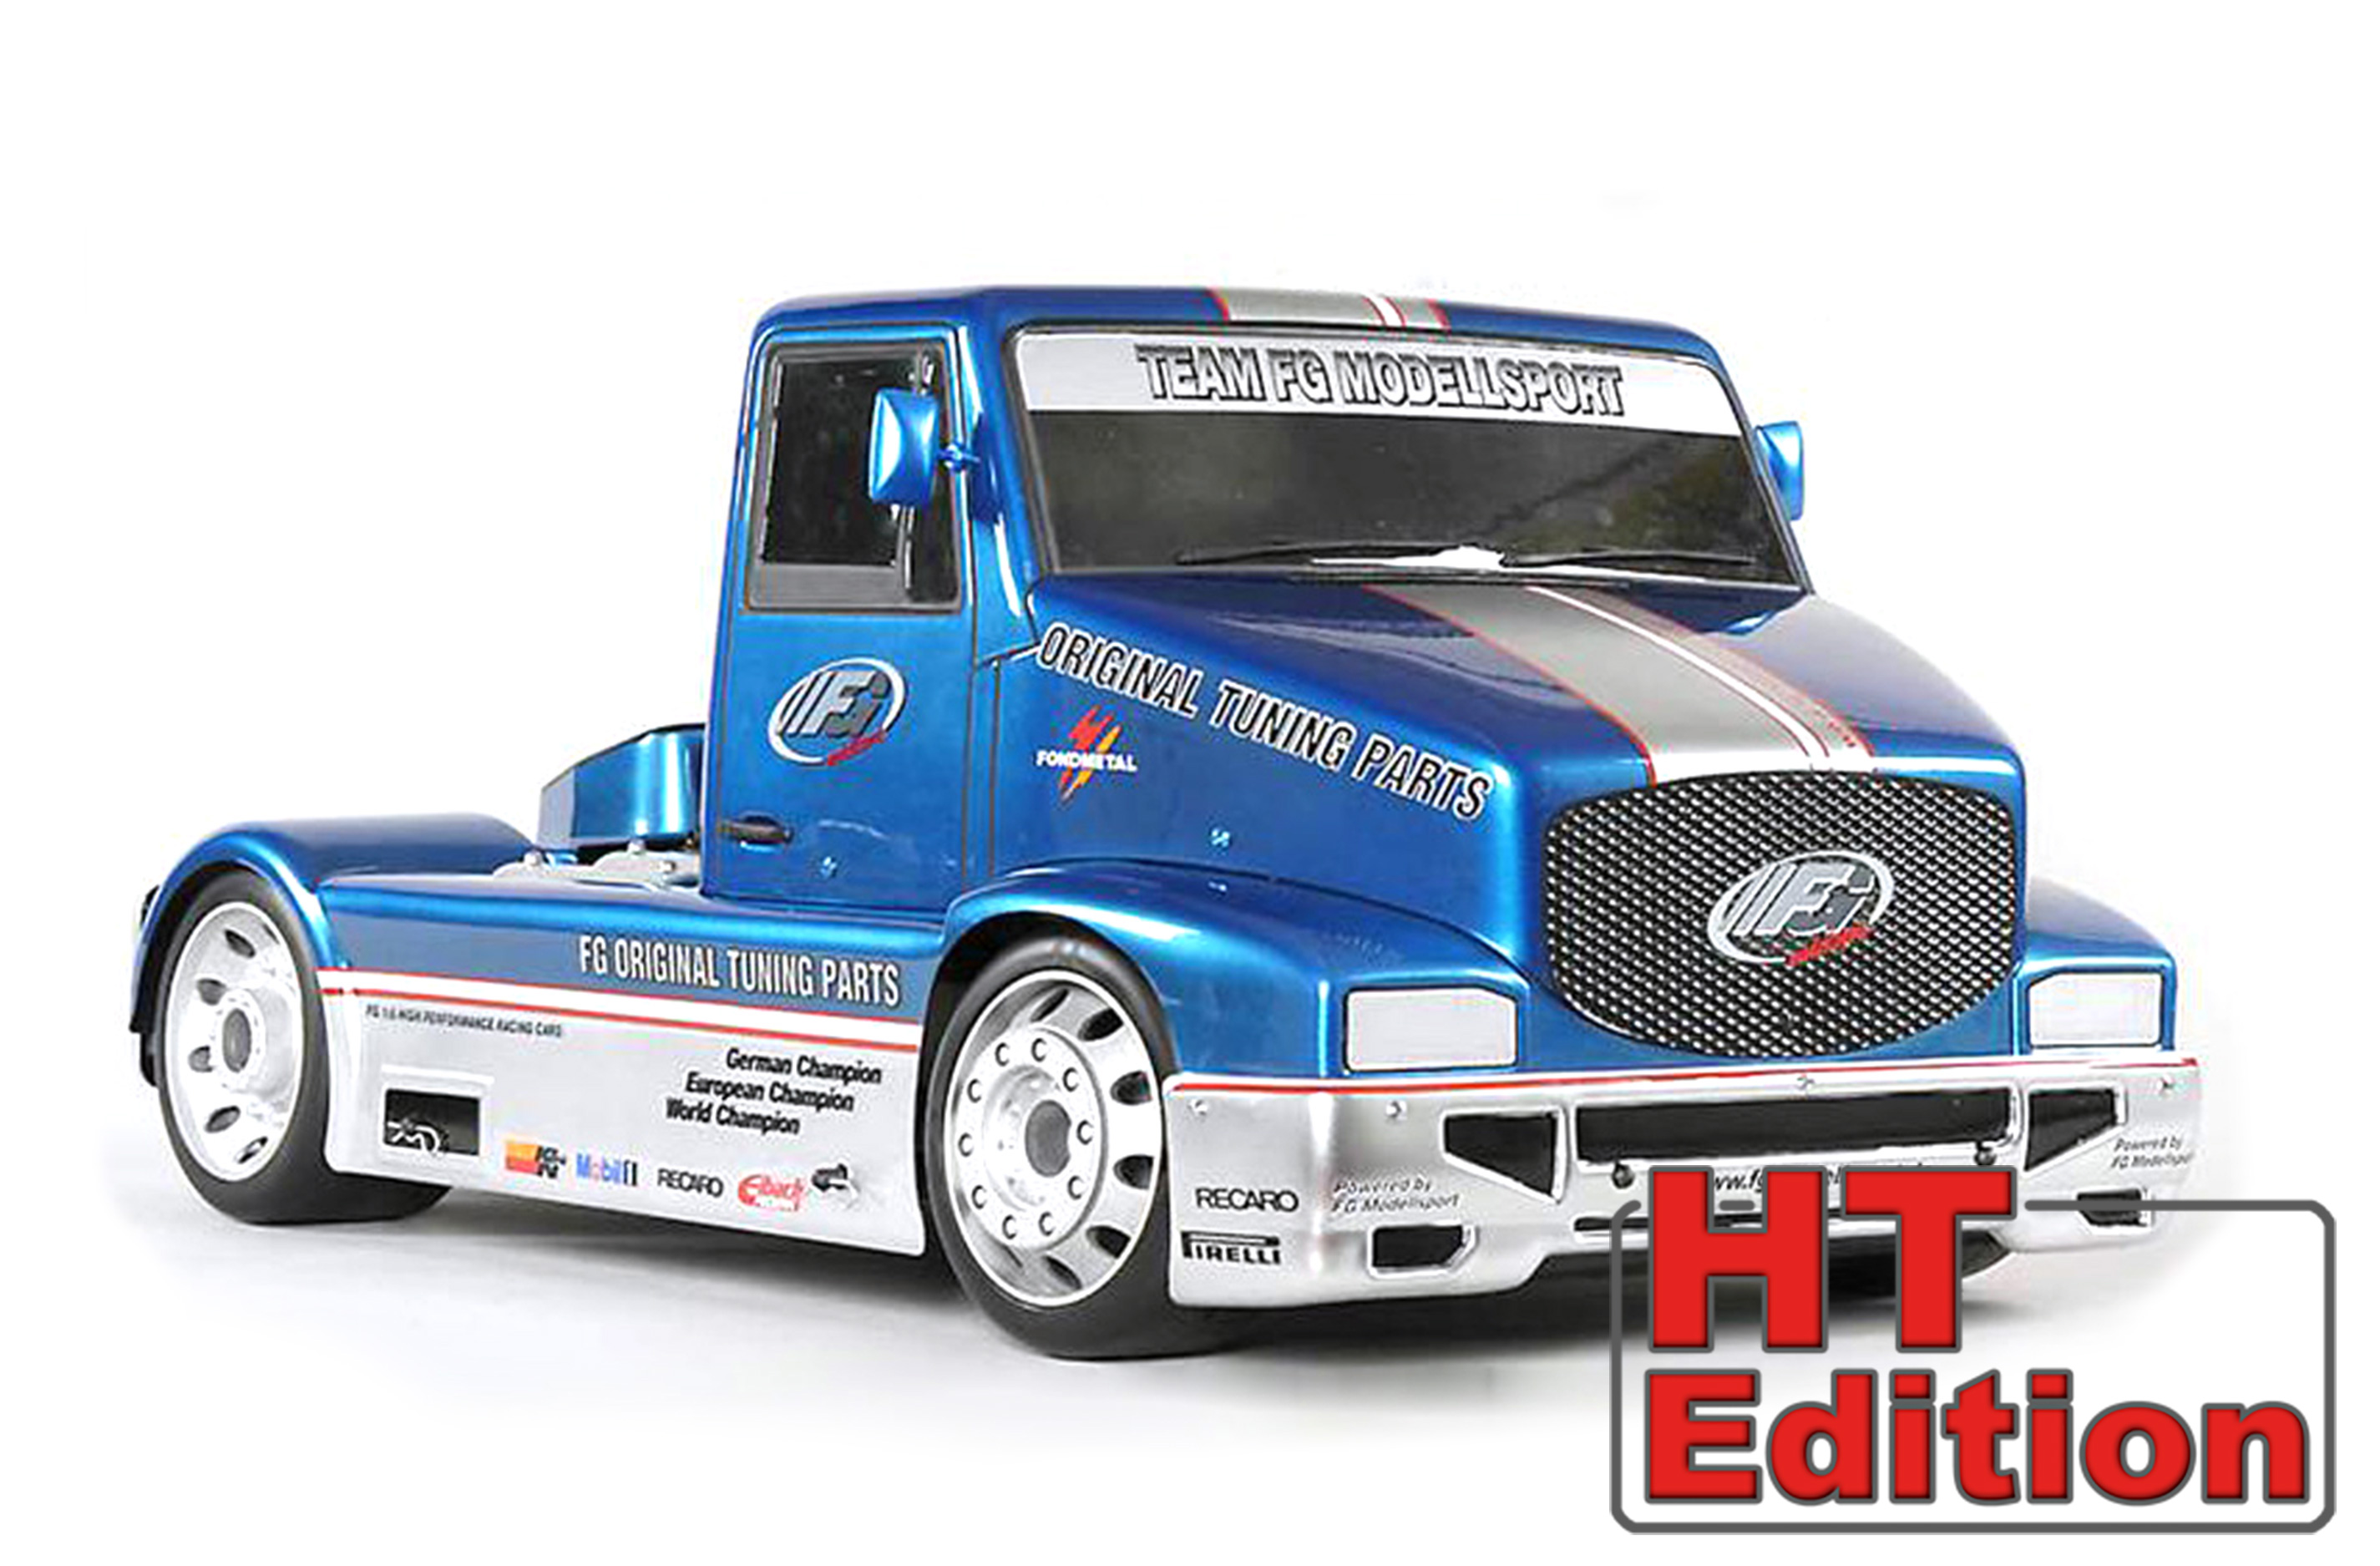 FG Sportsline Truck 4WD with FG Super Race Truck body shell clear HT-Edition